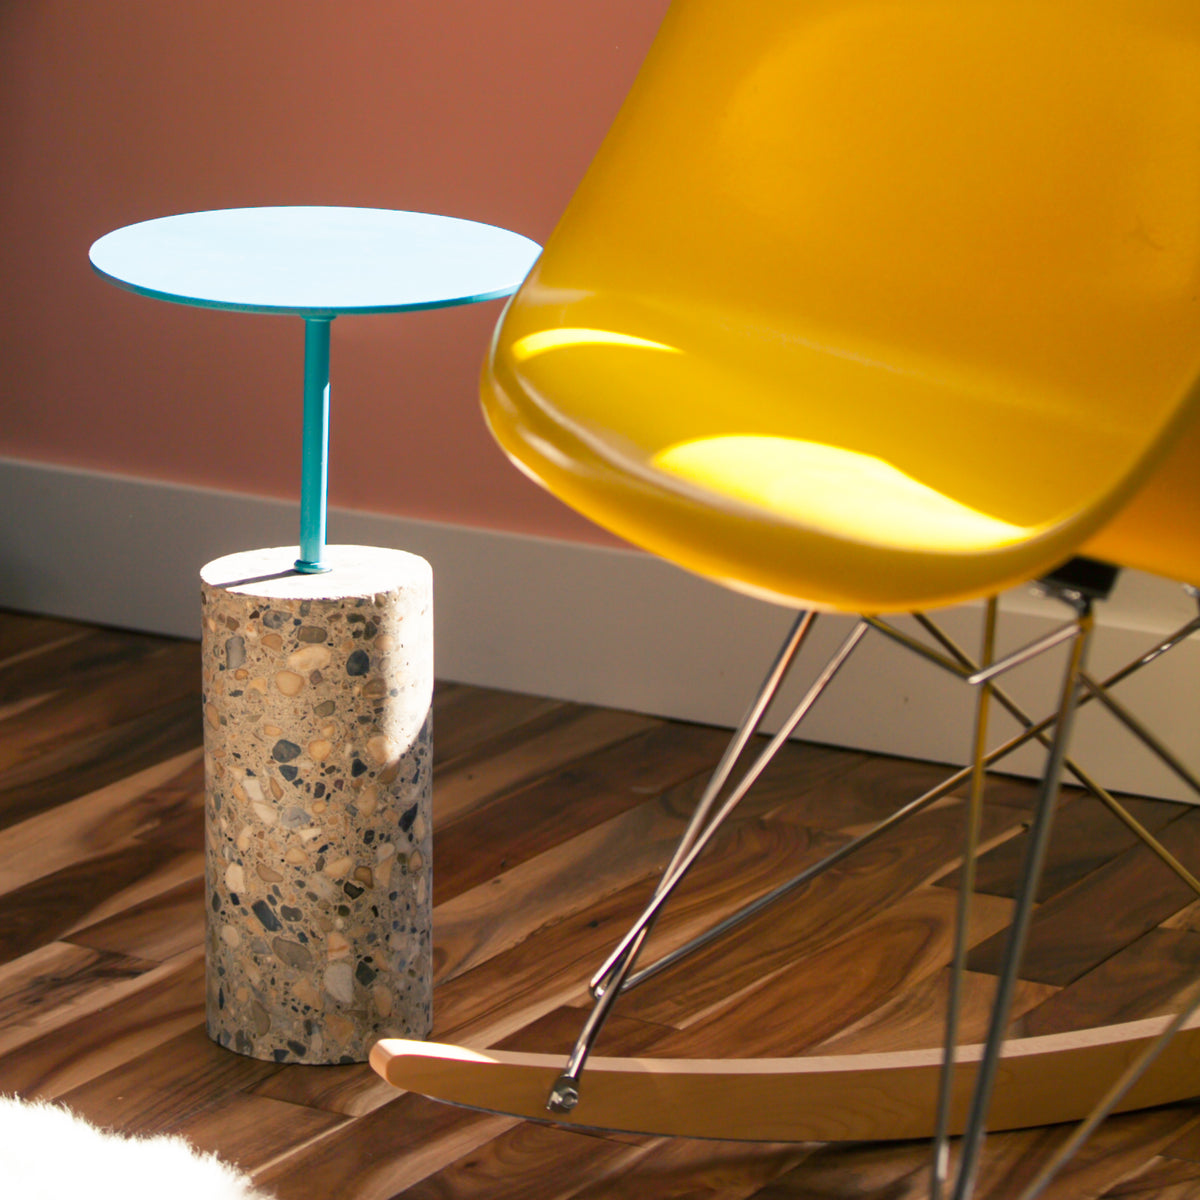 concrete core table made from recycled material